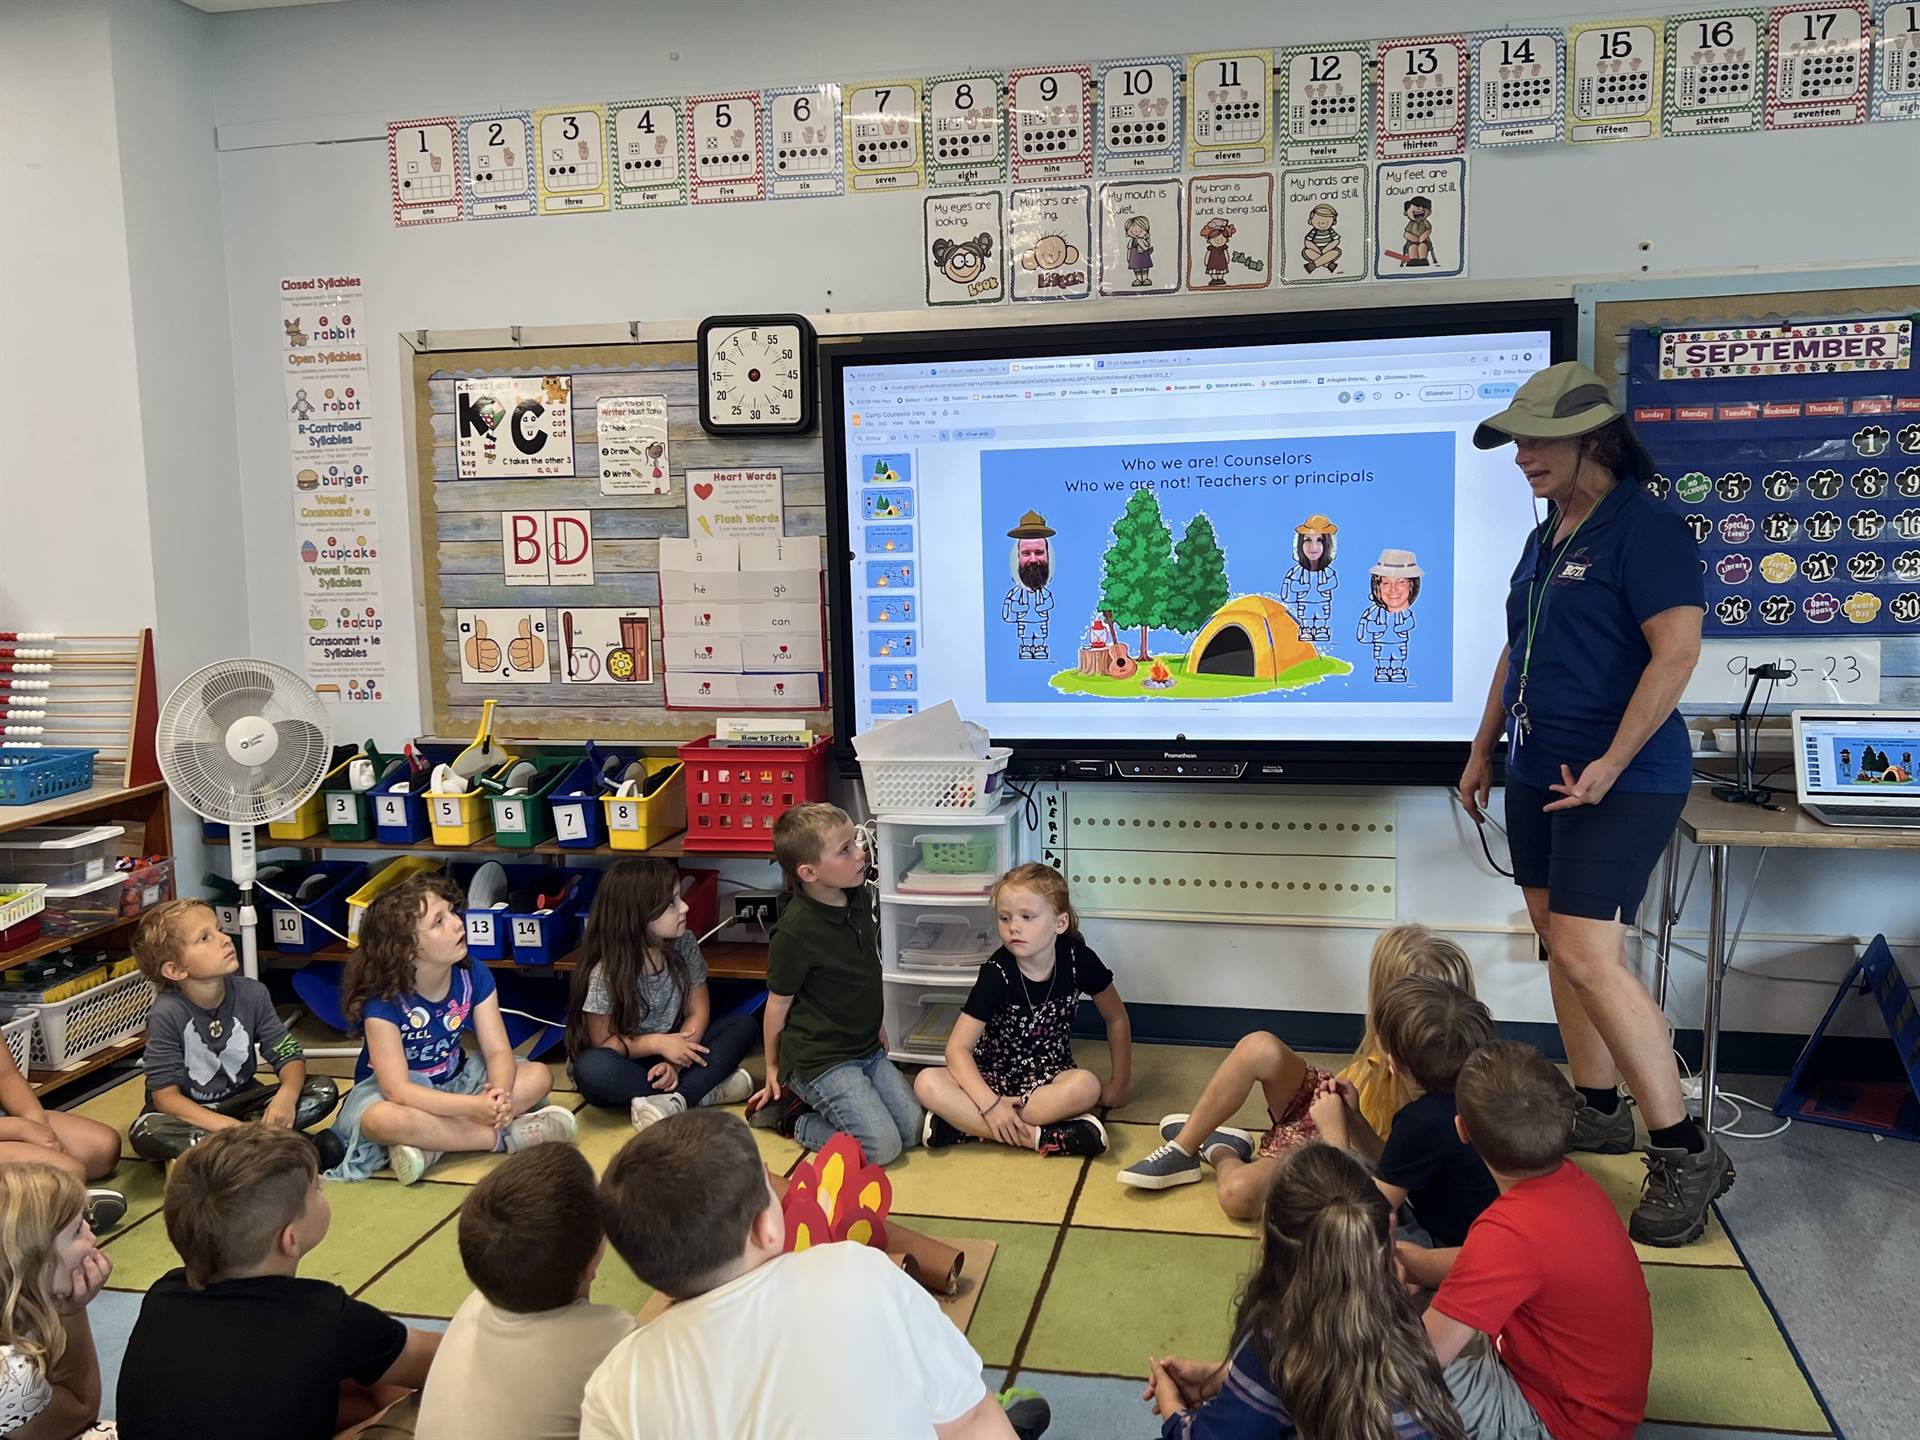 students looking at smart board and listening to adult dressed as a camper